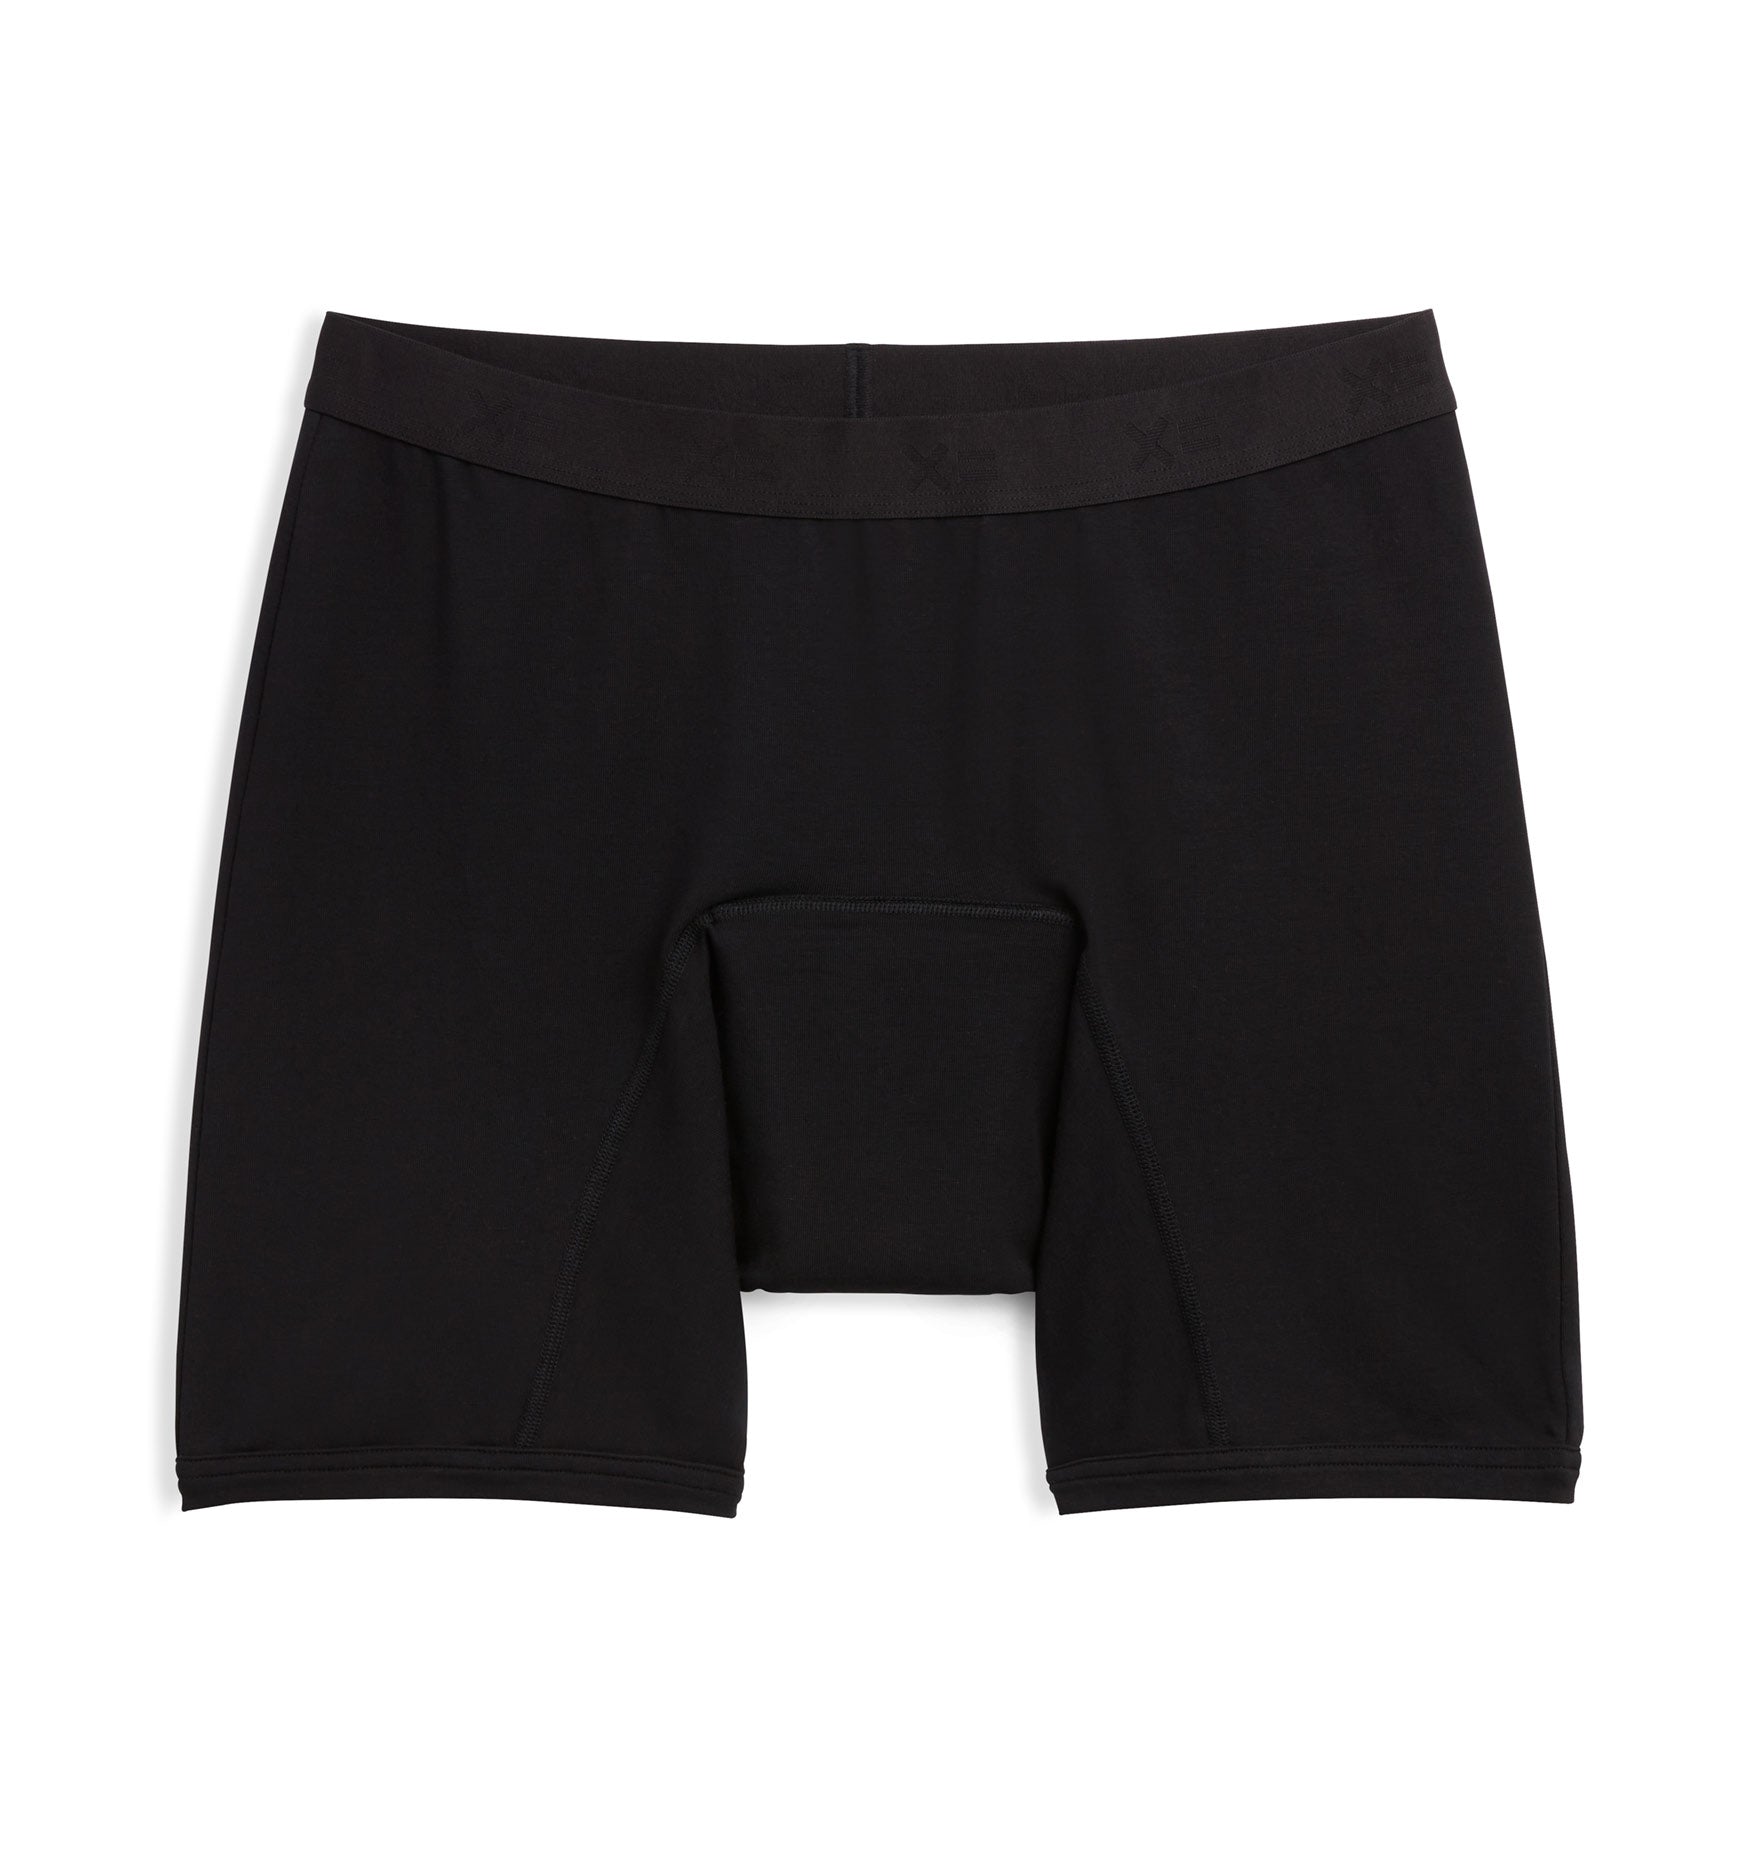 TomboyX First Line Period 9 Boxer Briefs - X= Black on Marmalade